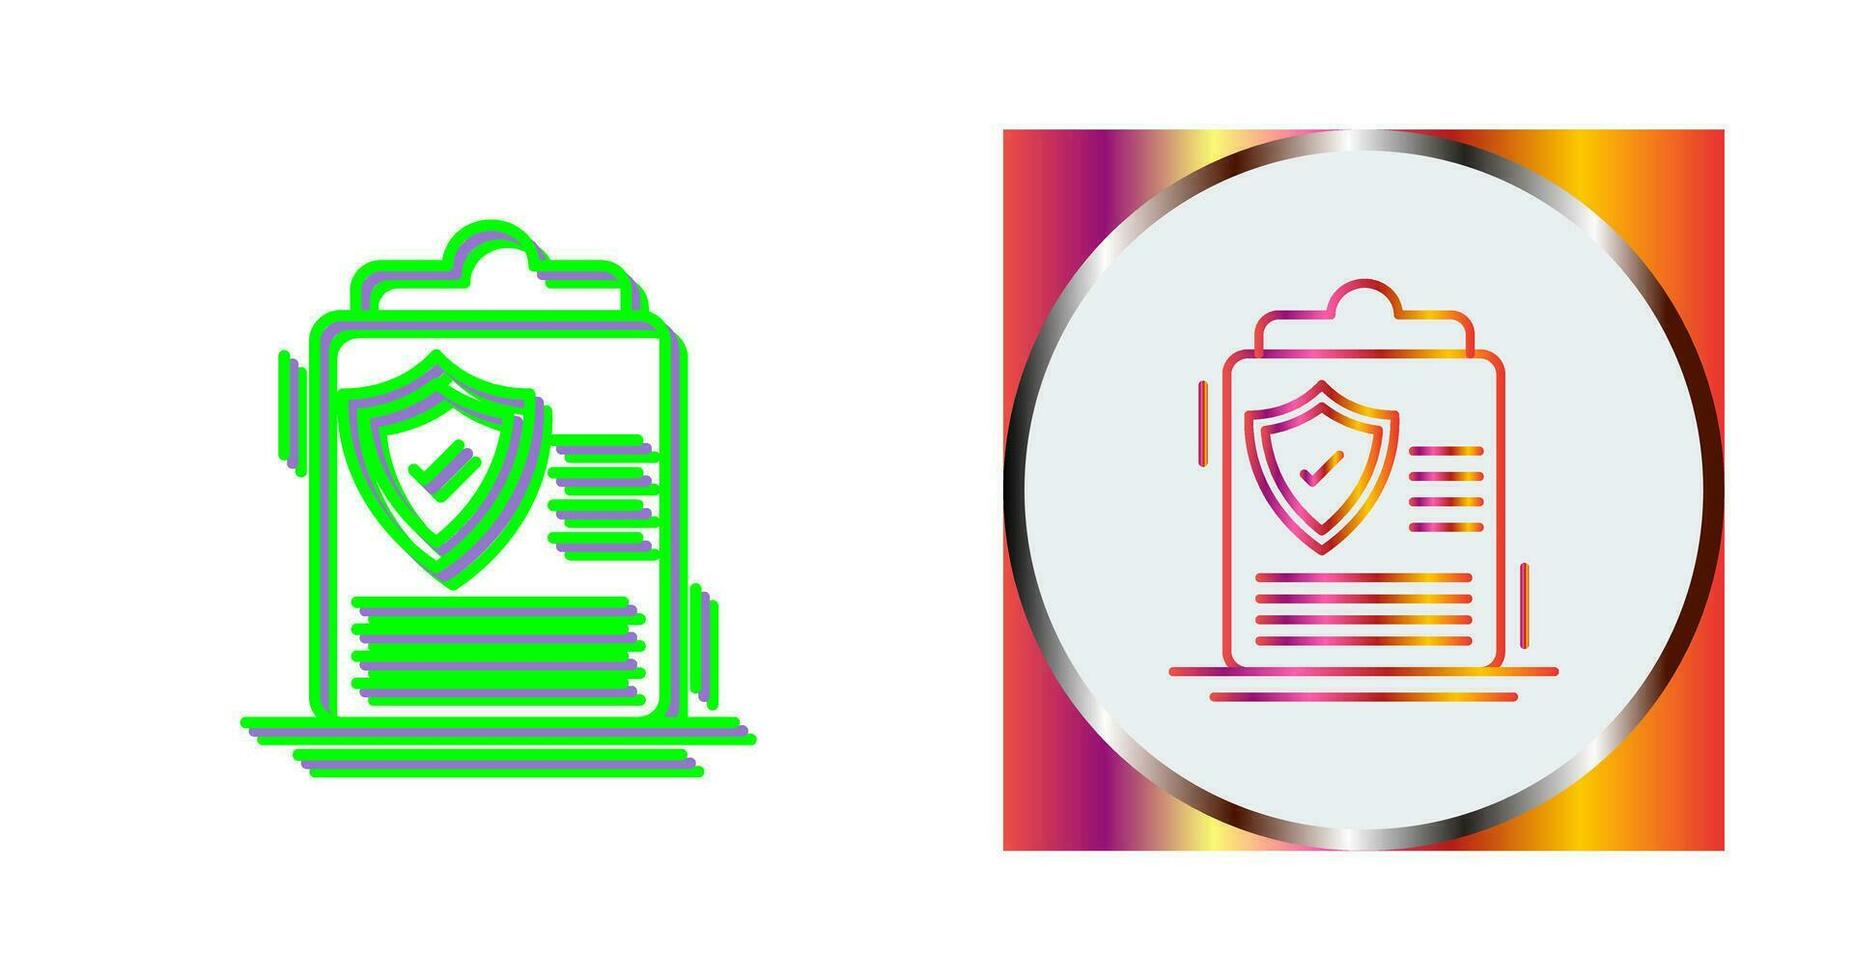 Protection Policy Vector Icon